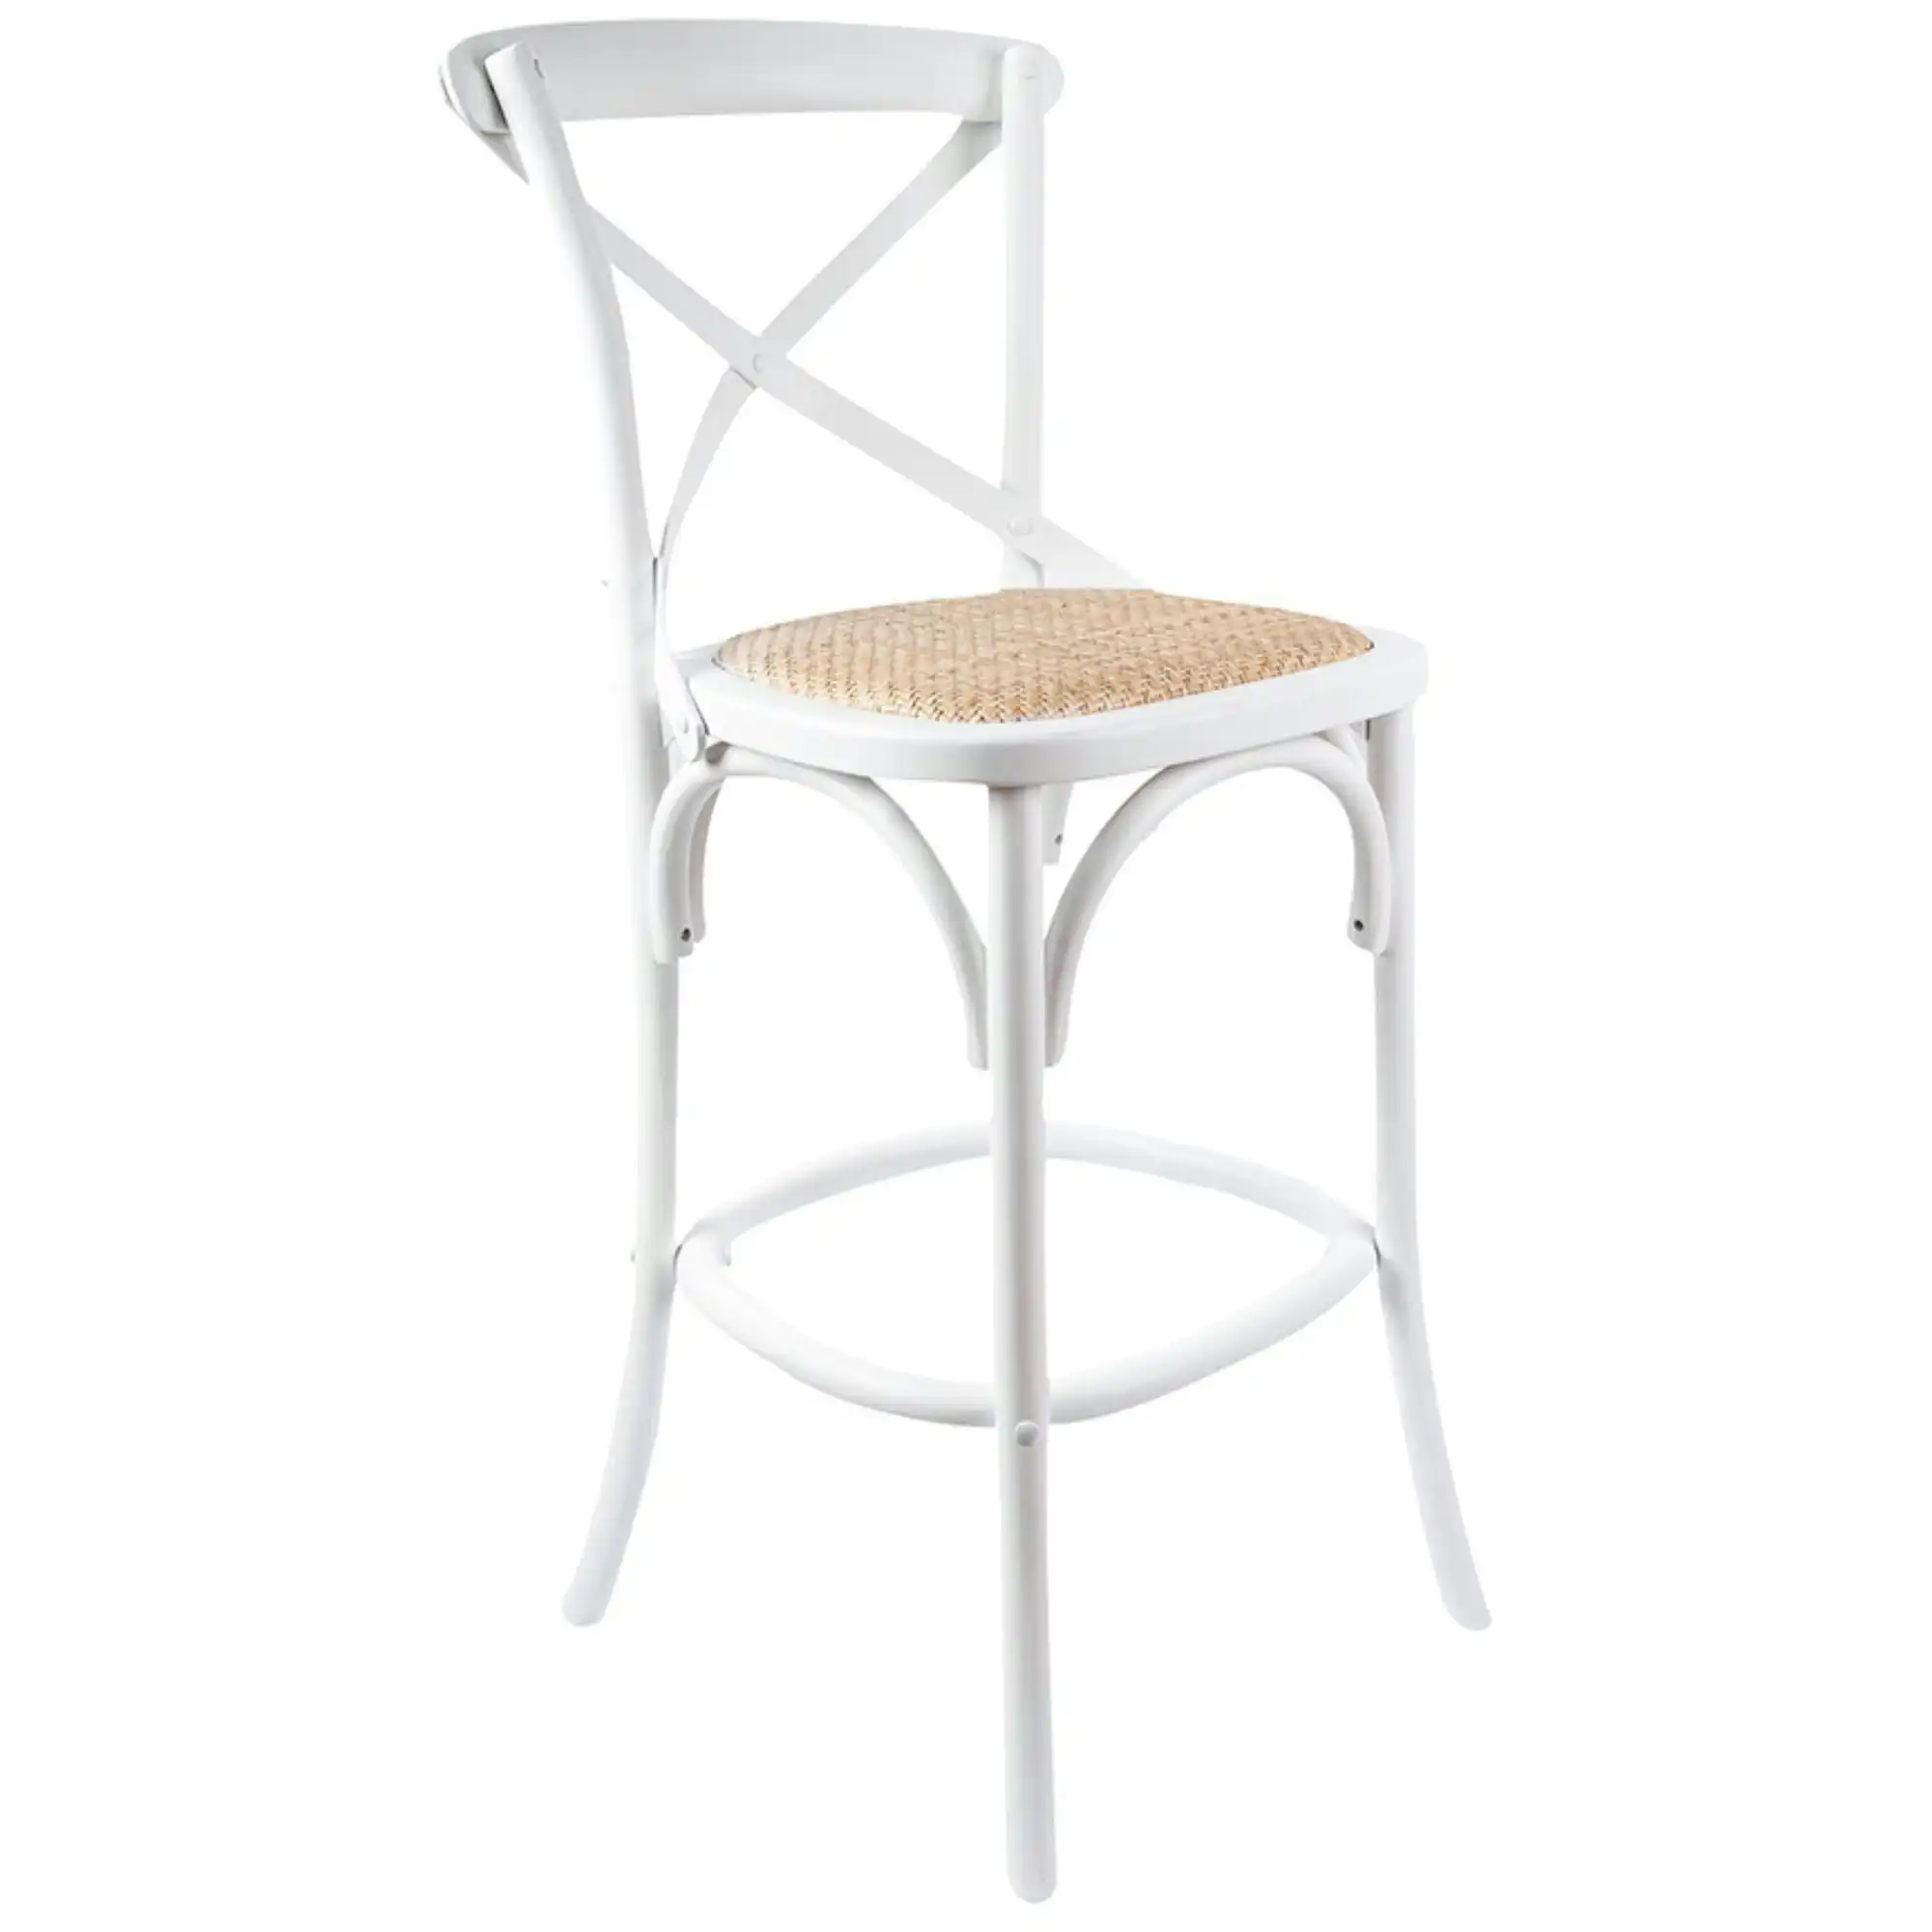 Aster Bar Stools Chair White